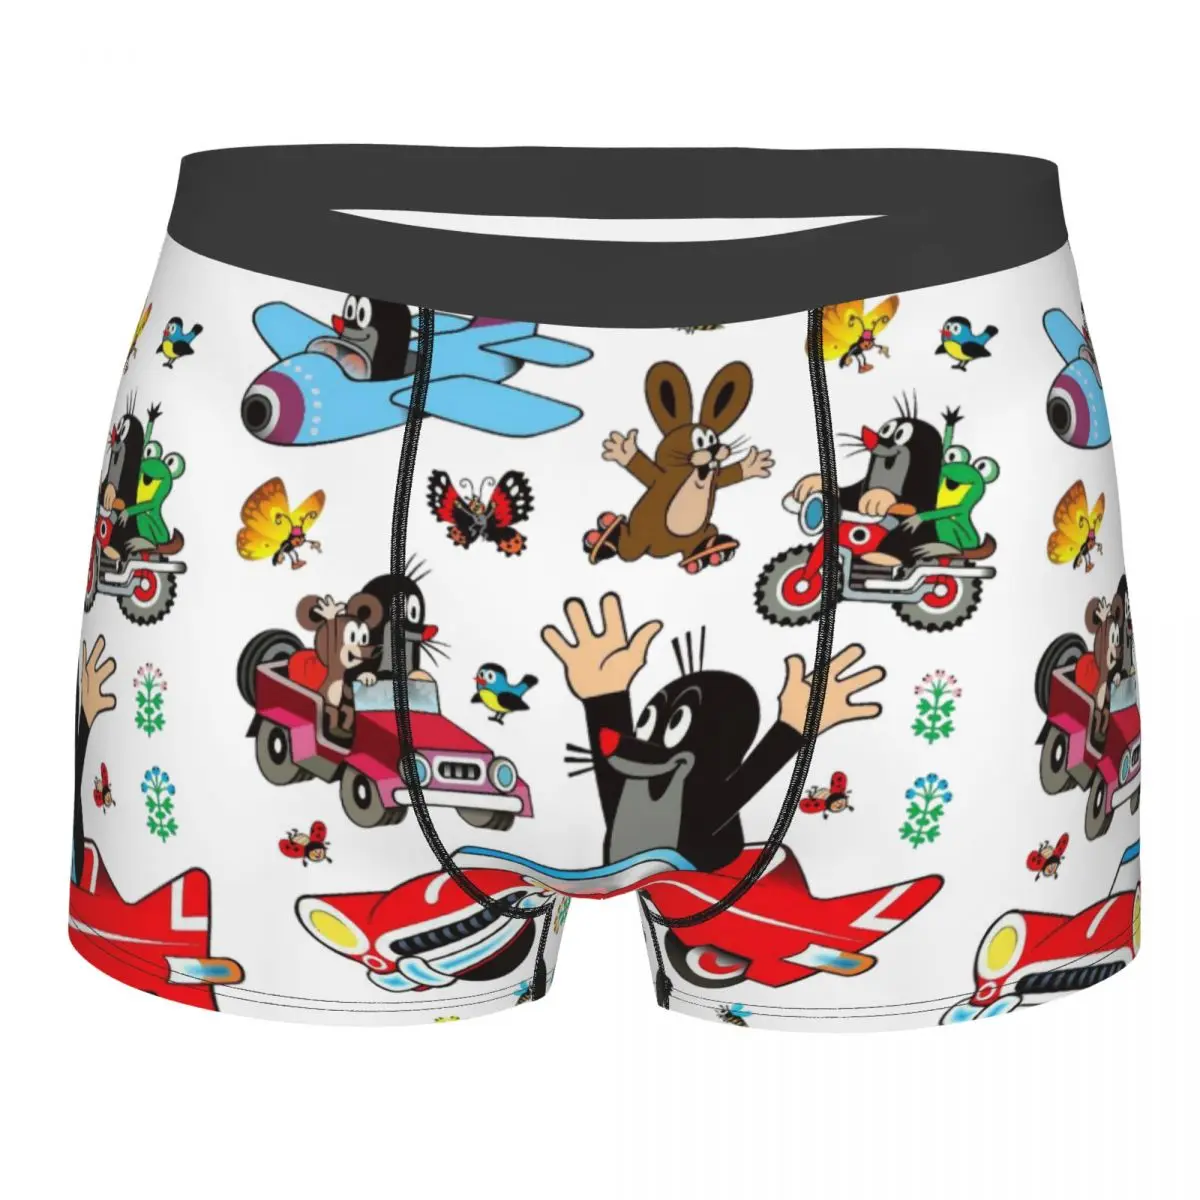 Krtek Little Maulwurf Mencosy Boxer Briefs,3D printing Underwear, Highly Breathable Top Quality Gift Idea cool animals lions tigers mencosy boxer briefs 3d printing underwear highly breathable top quality gift idea